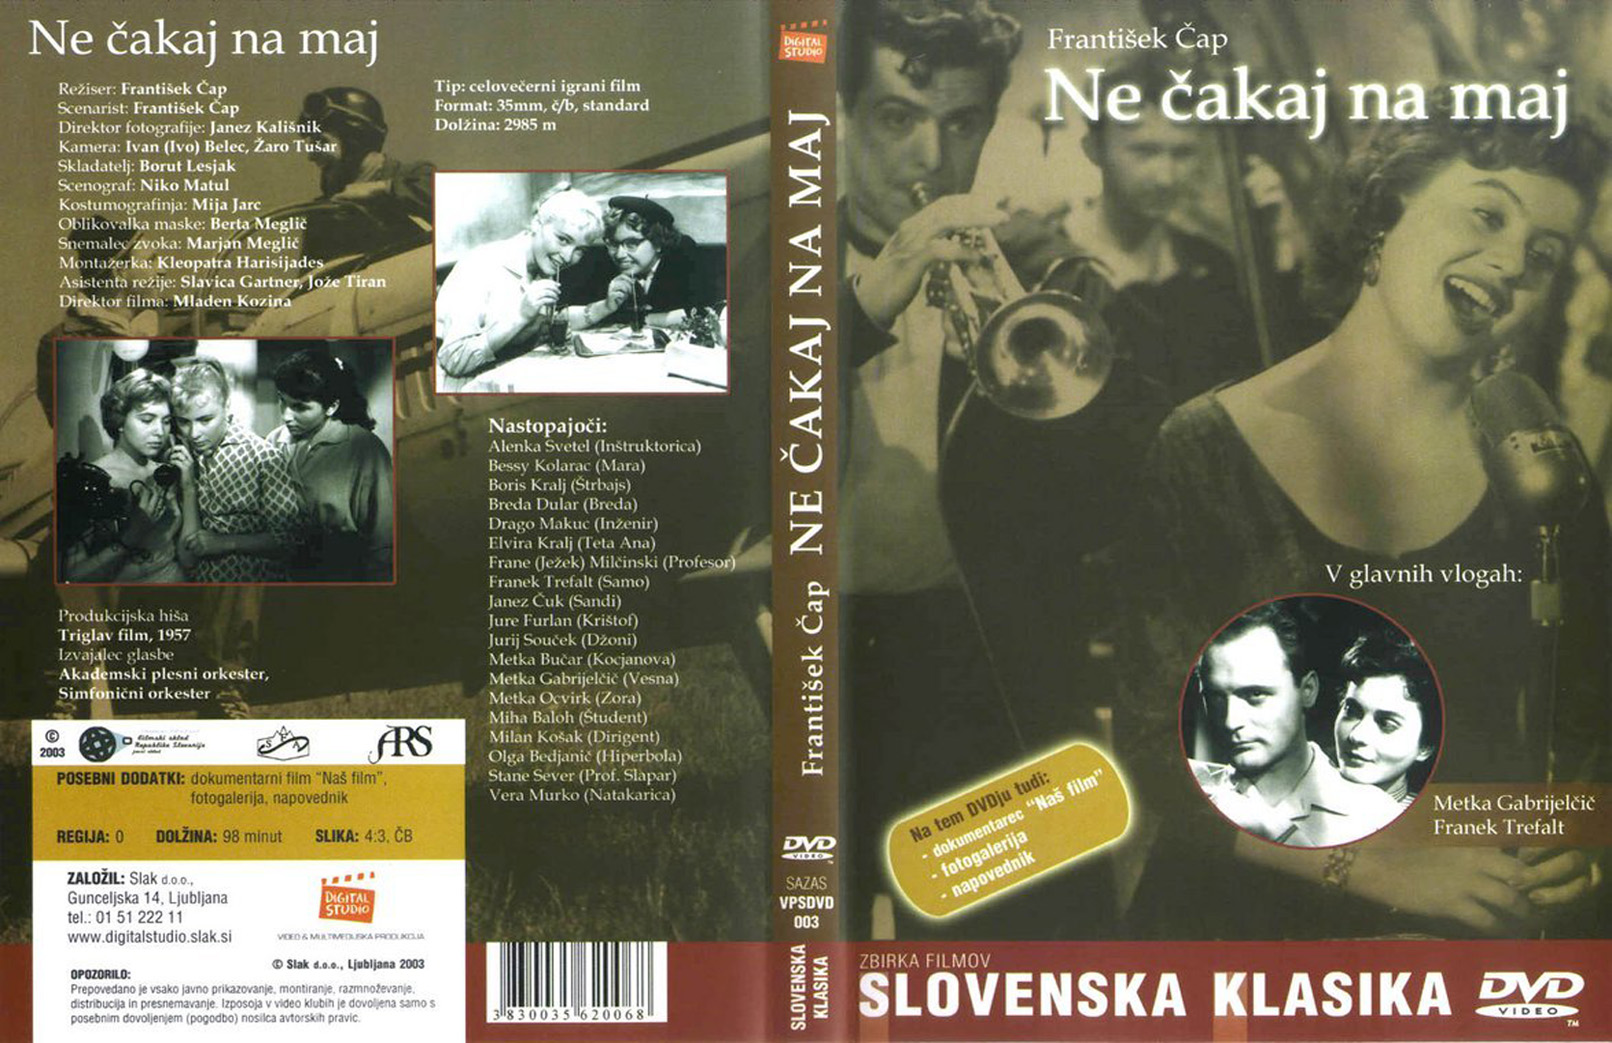 Click to view full size image -  DVD Cover - N - ne_cekaj_na_maj_slo_dvd - ne_cekaj_na_maj_slo_dvd.jpg